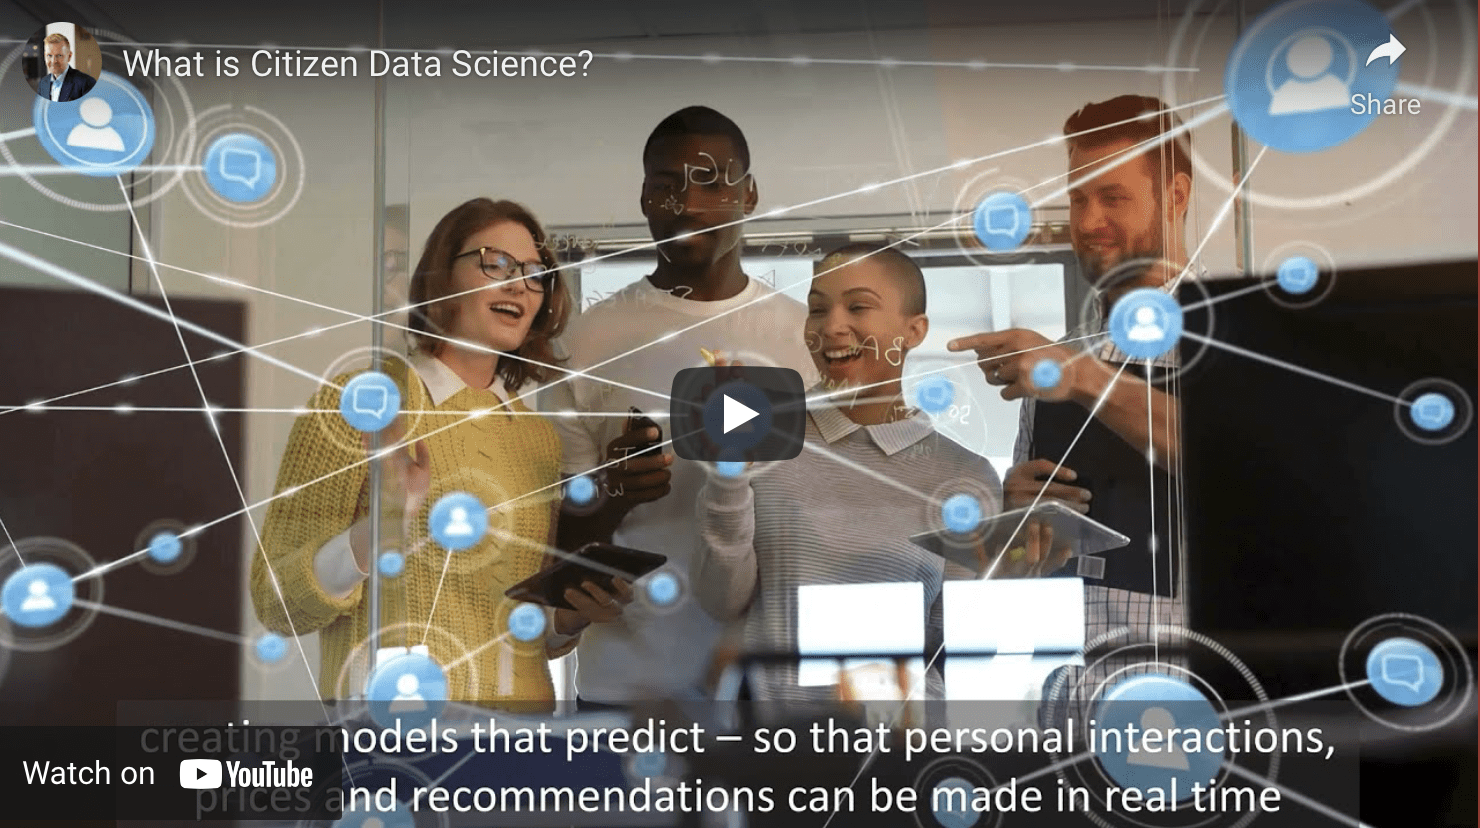 VIDEO - Citizen Data Science explained in 3 minutes!